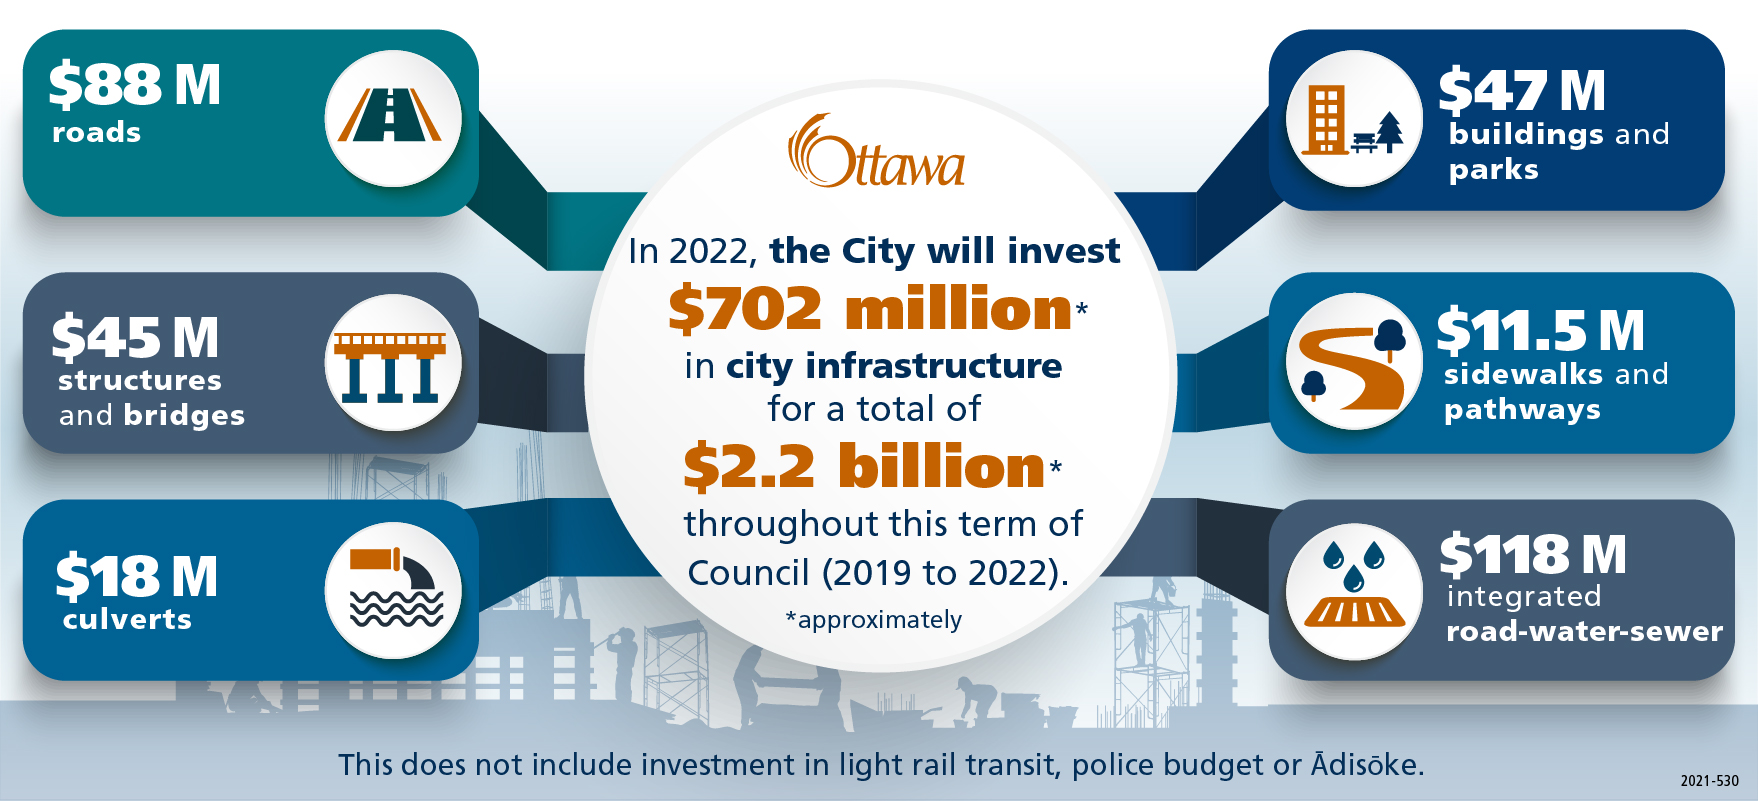 Construction infographic showing the City's $702 million investment in City infrastructure in 2022.